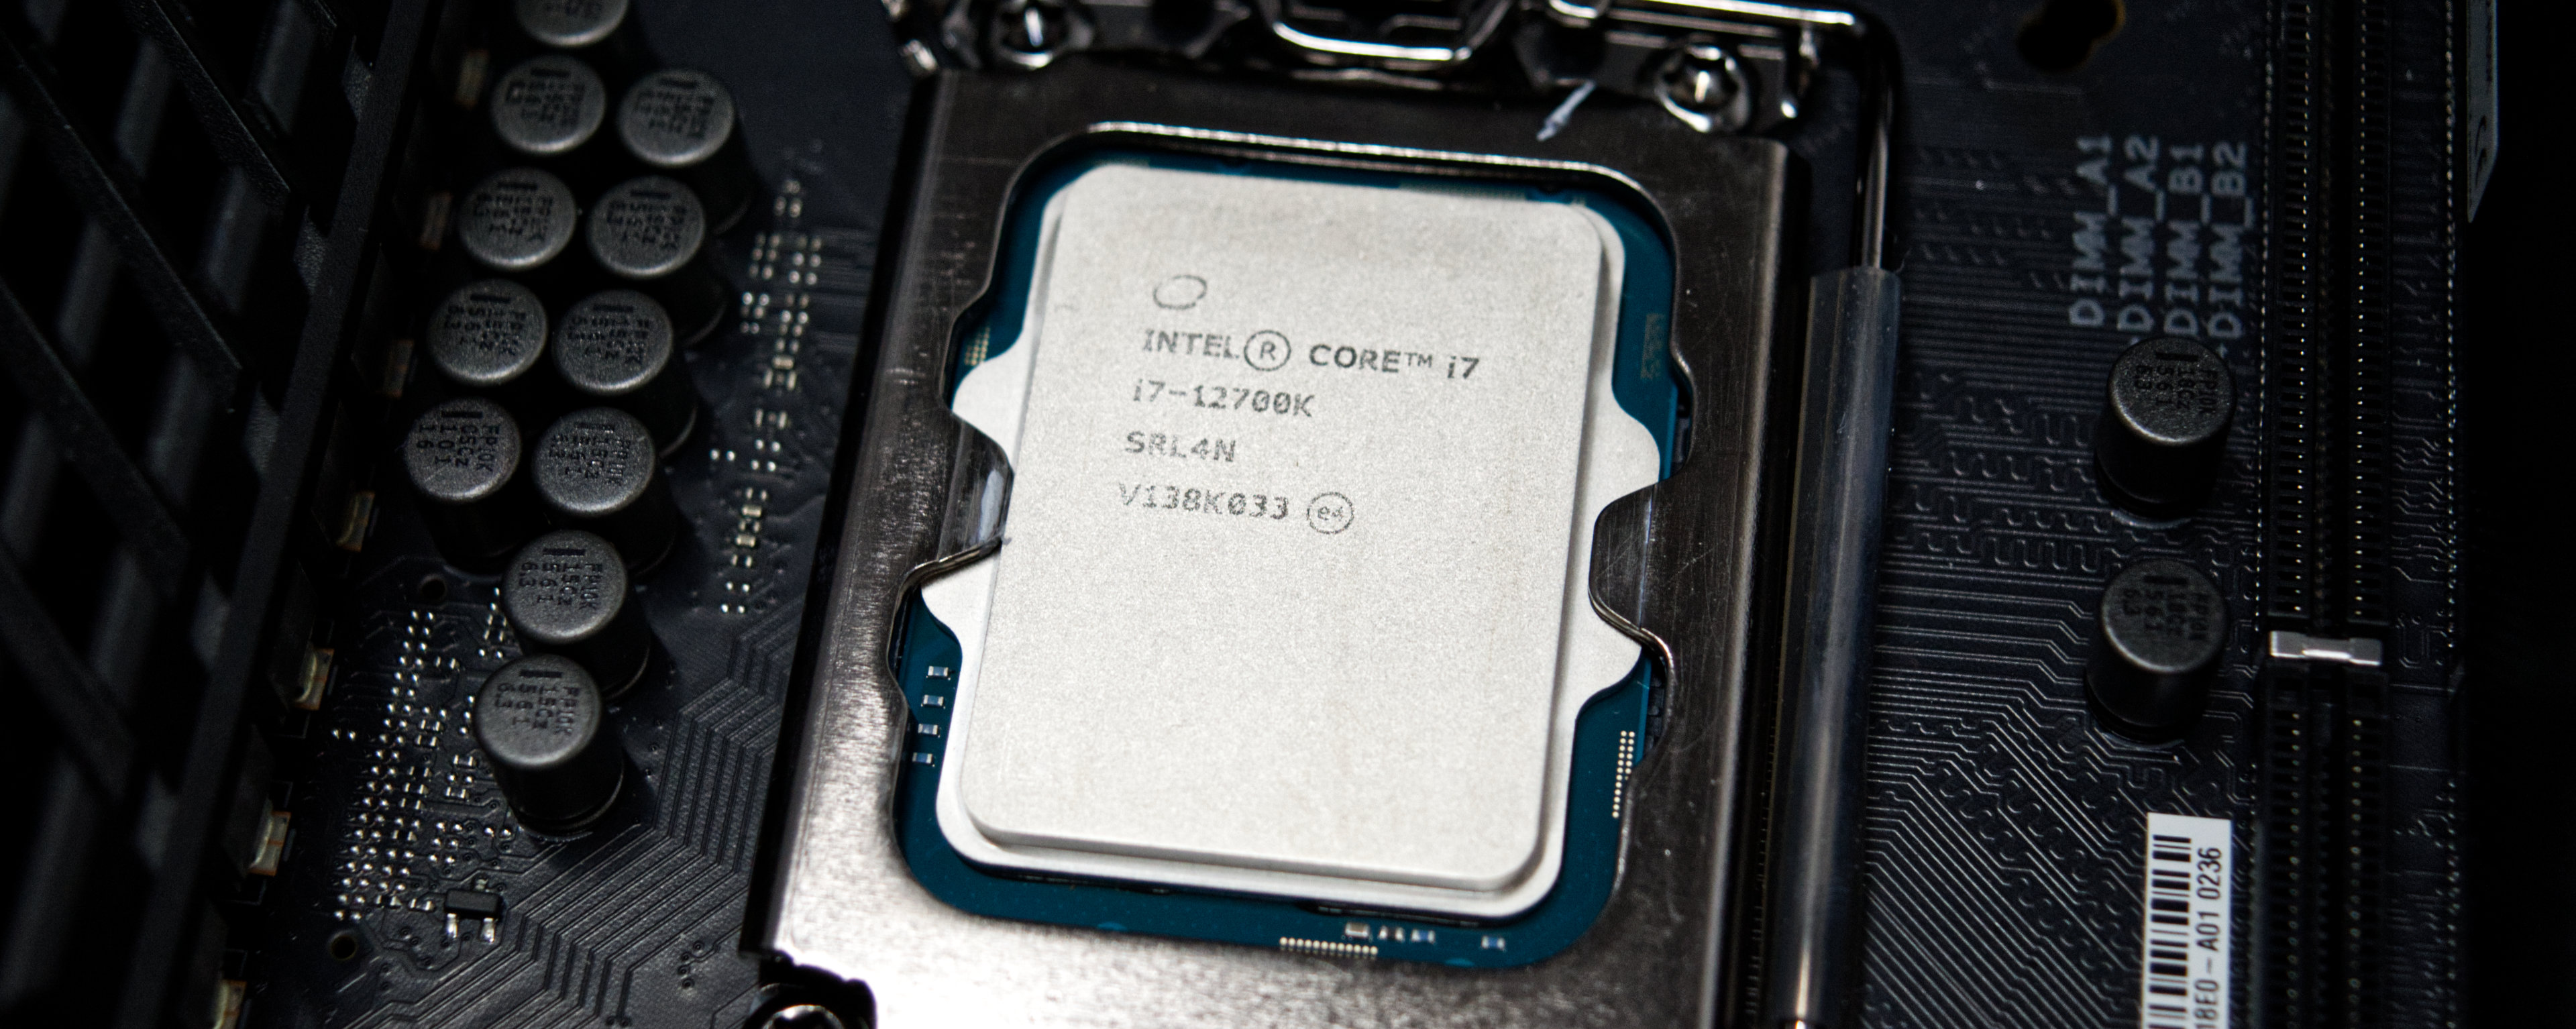 Intel Core i7-12700K Gaming Desktop Processor with Integrated Graphics 